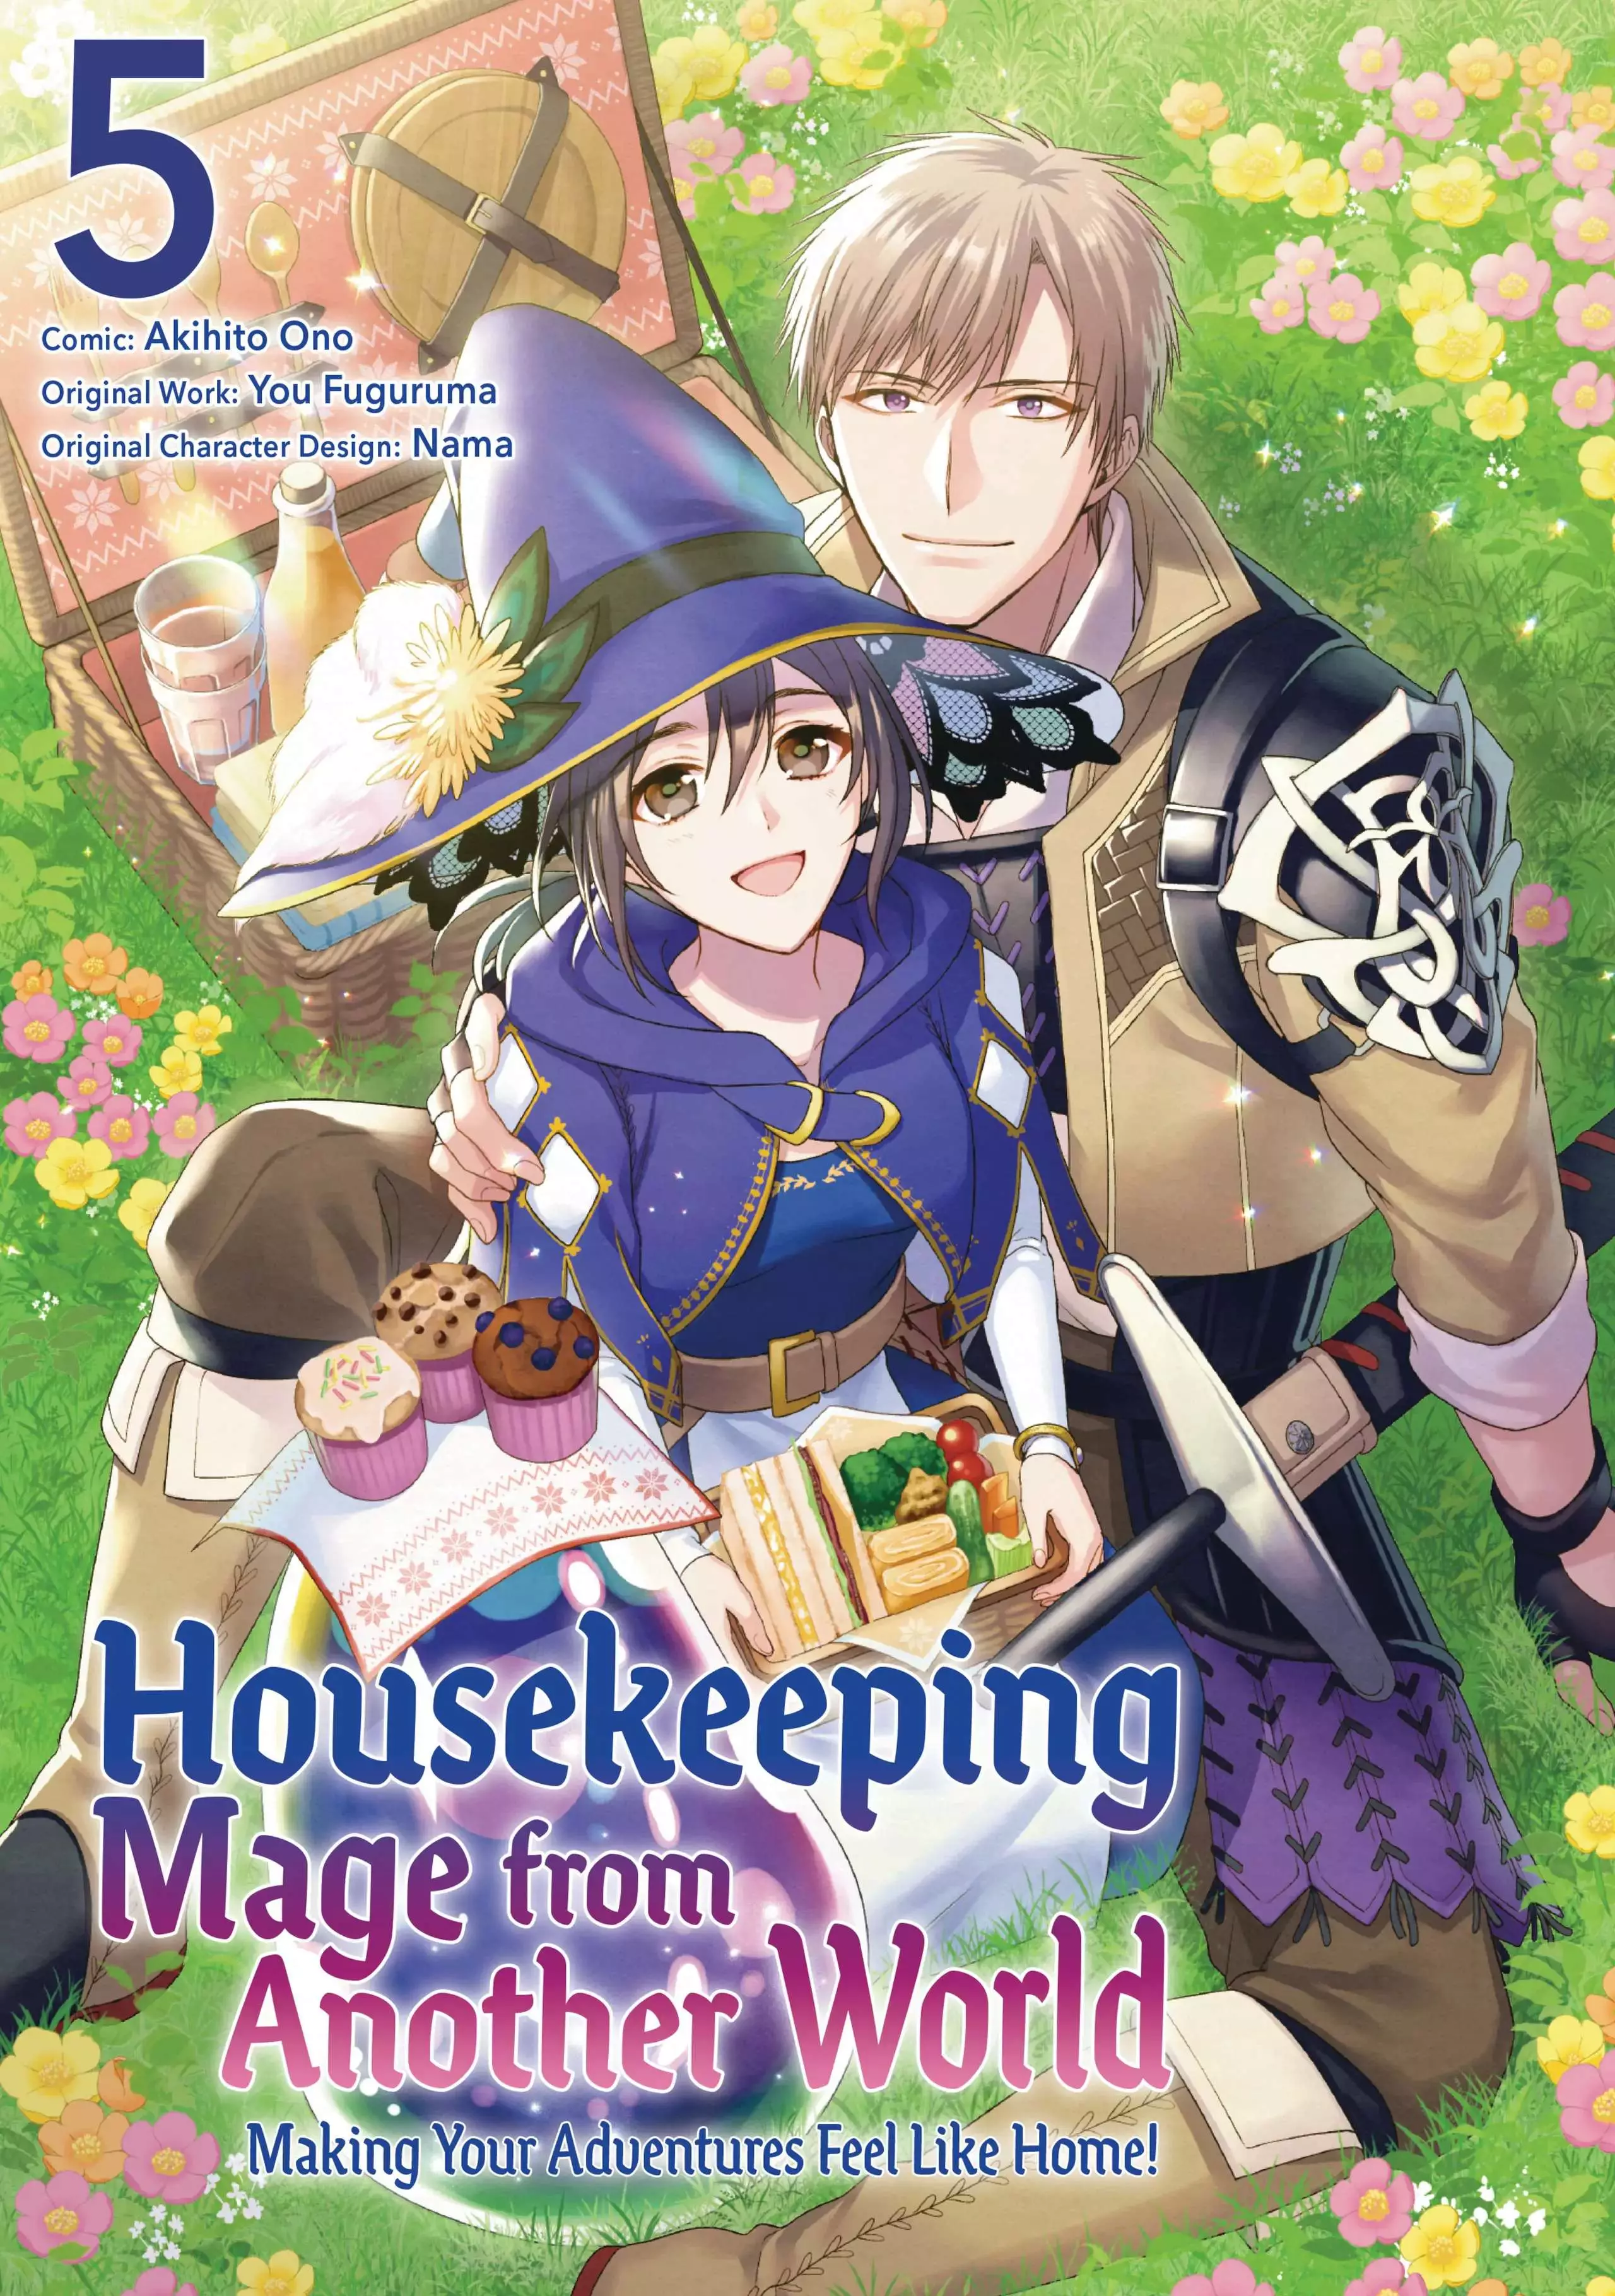 Life In Another World As A Housekeeping Mage - 25 page 1-45333edf